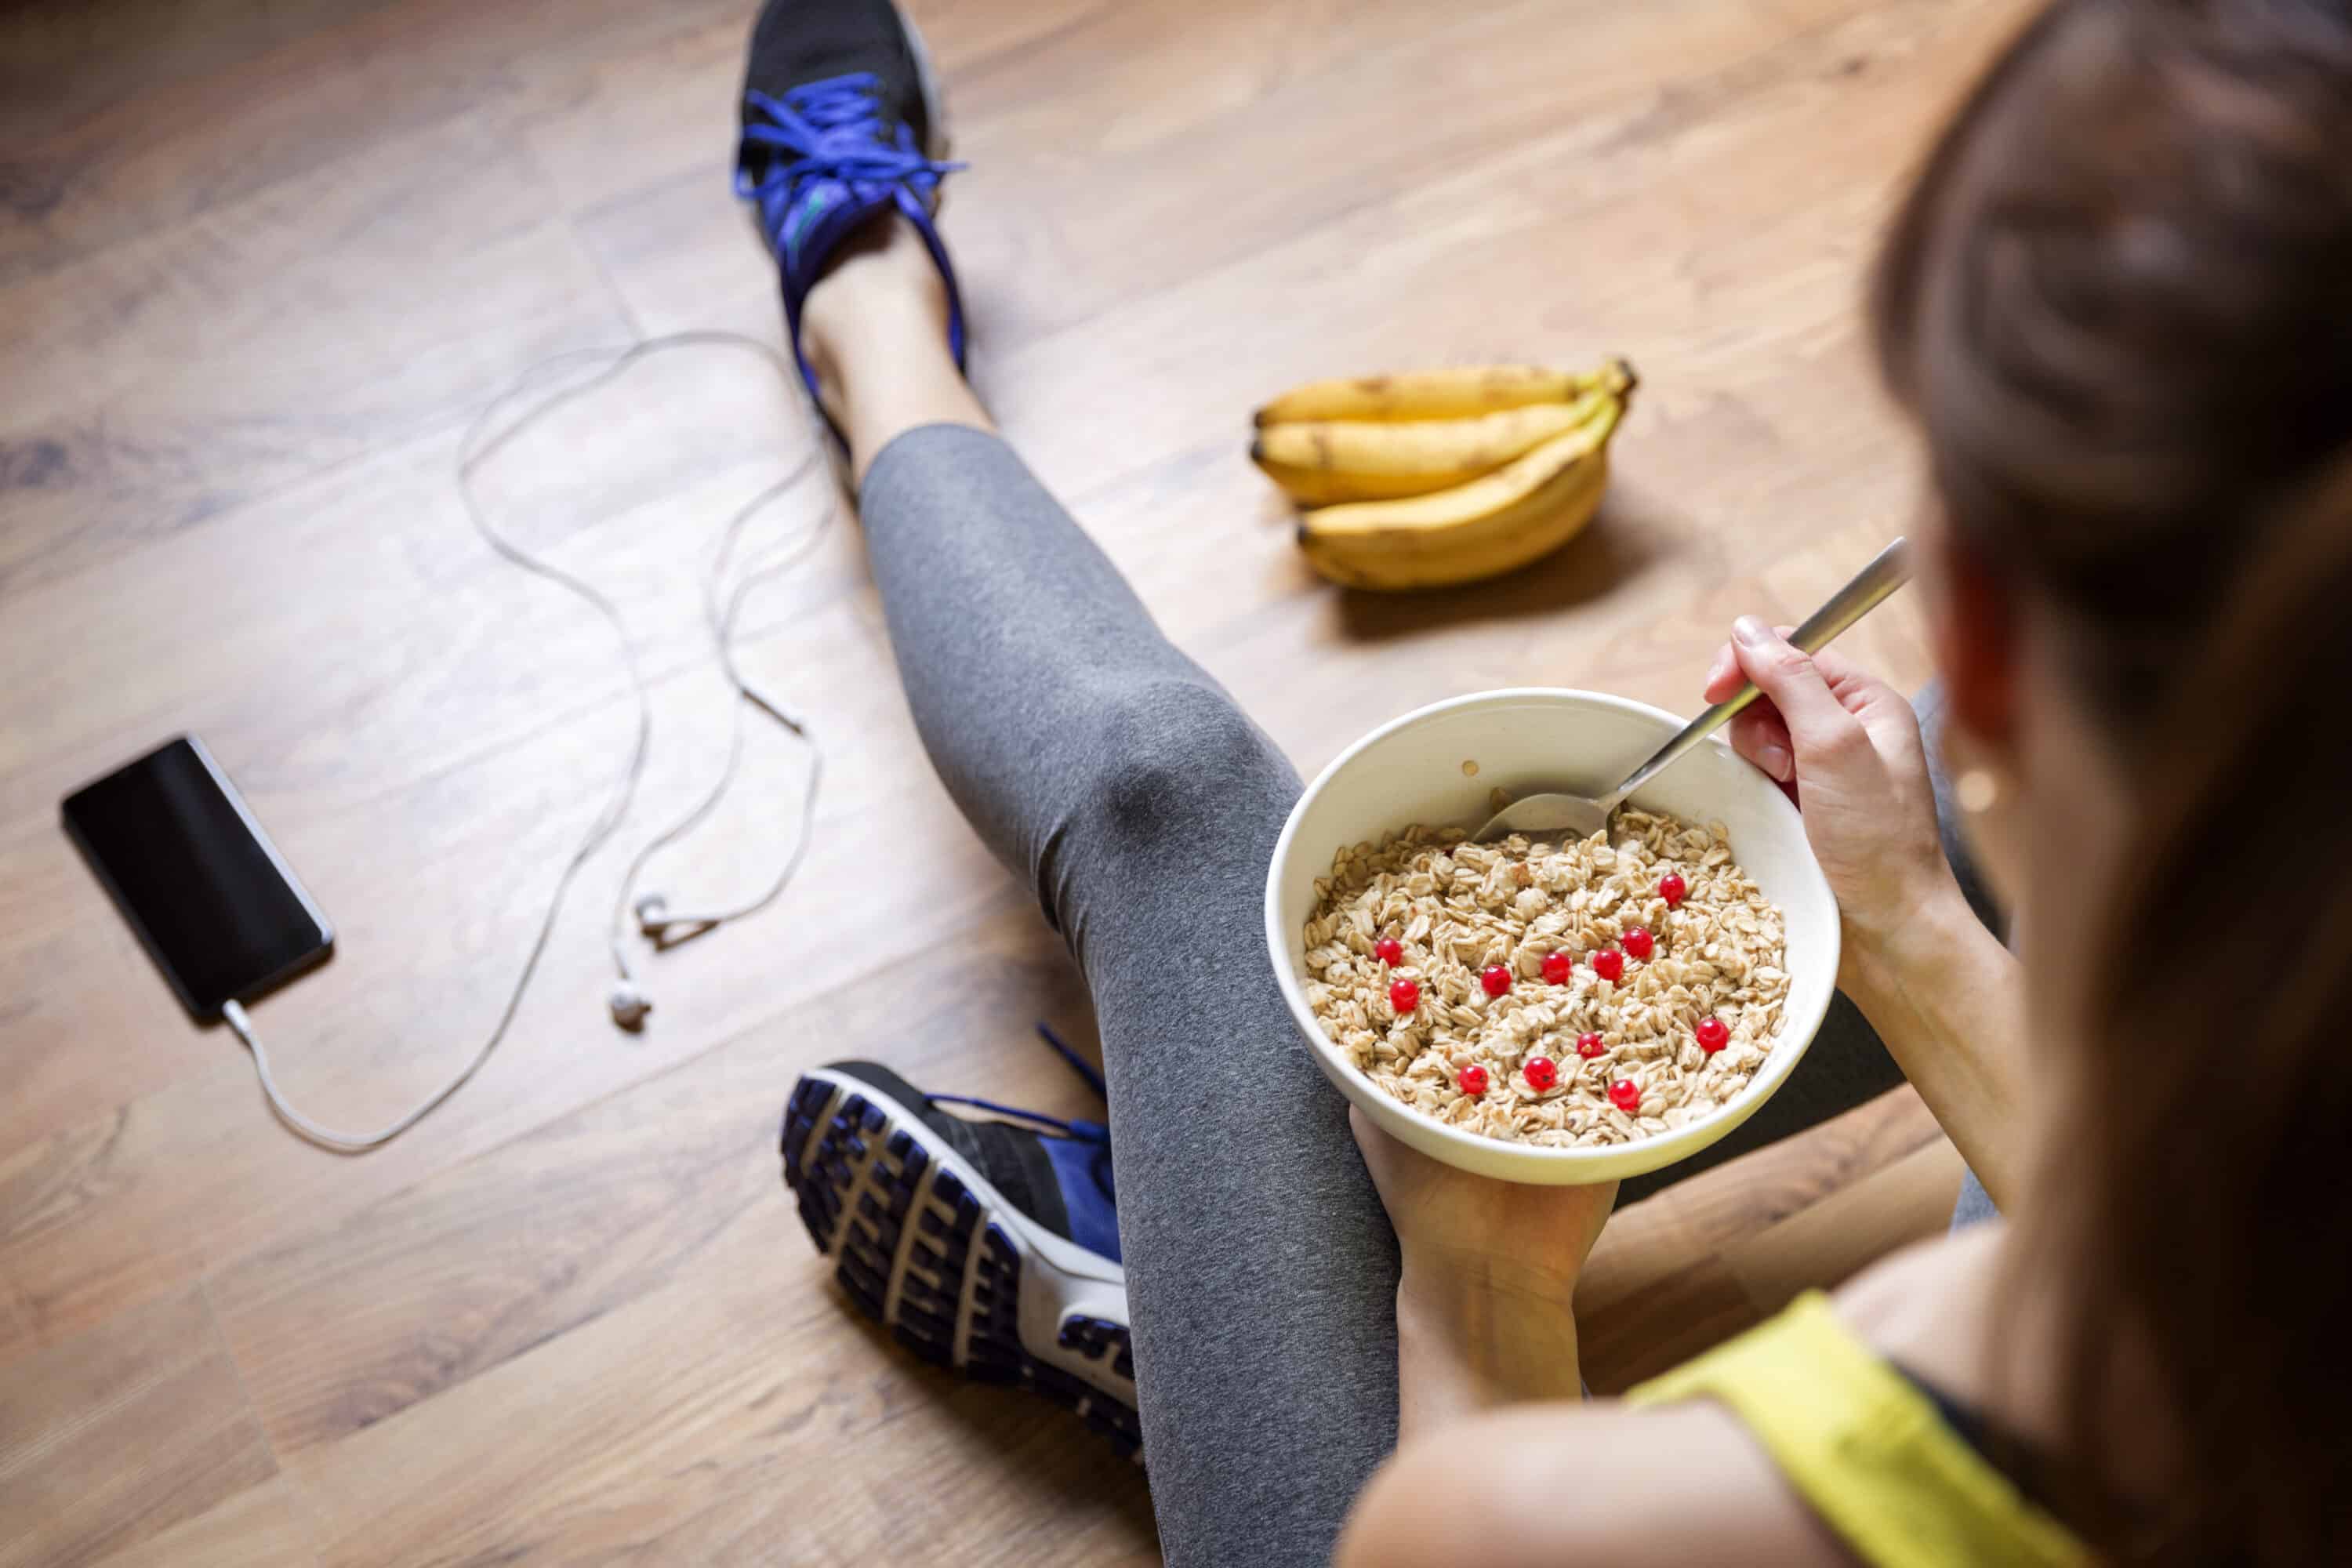 Want to Earn Your Sports Nutrition Certification Online? Here’s What to Know